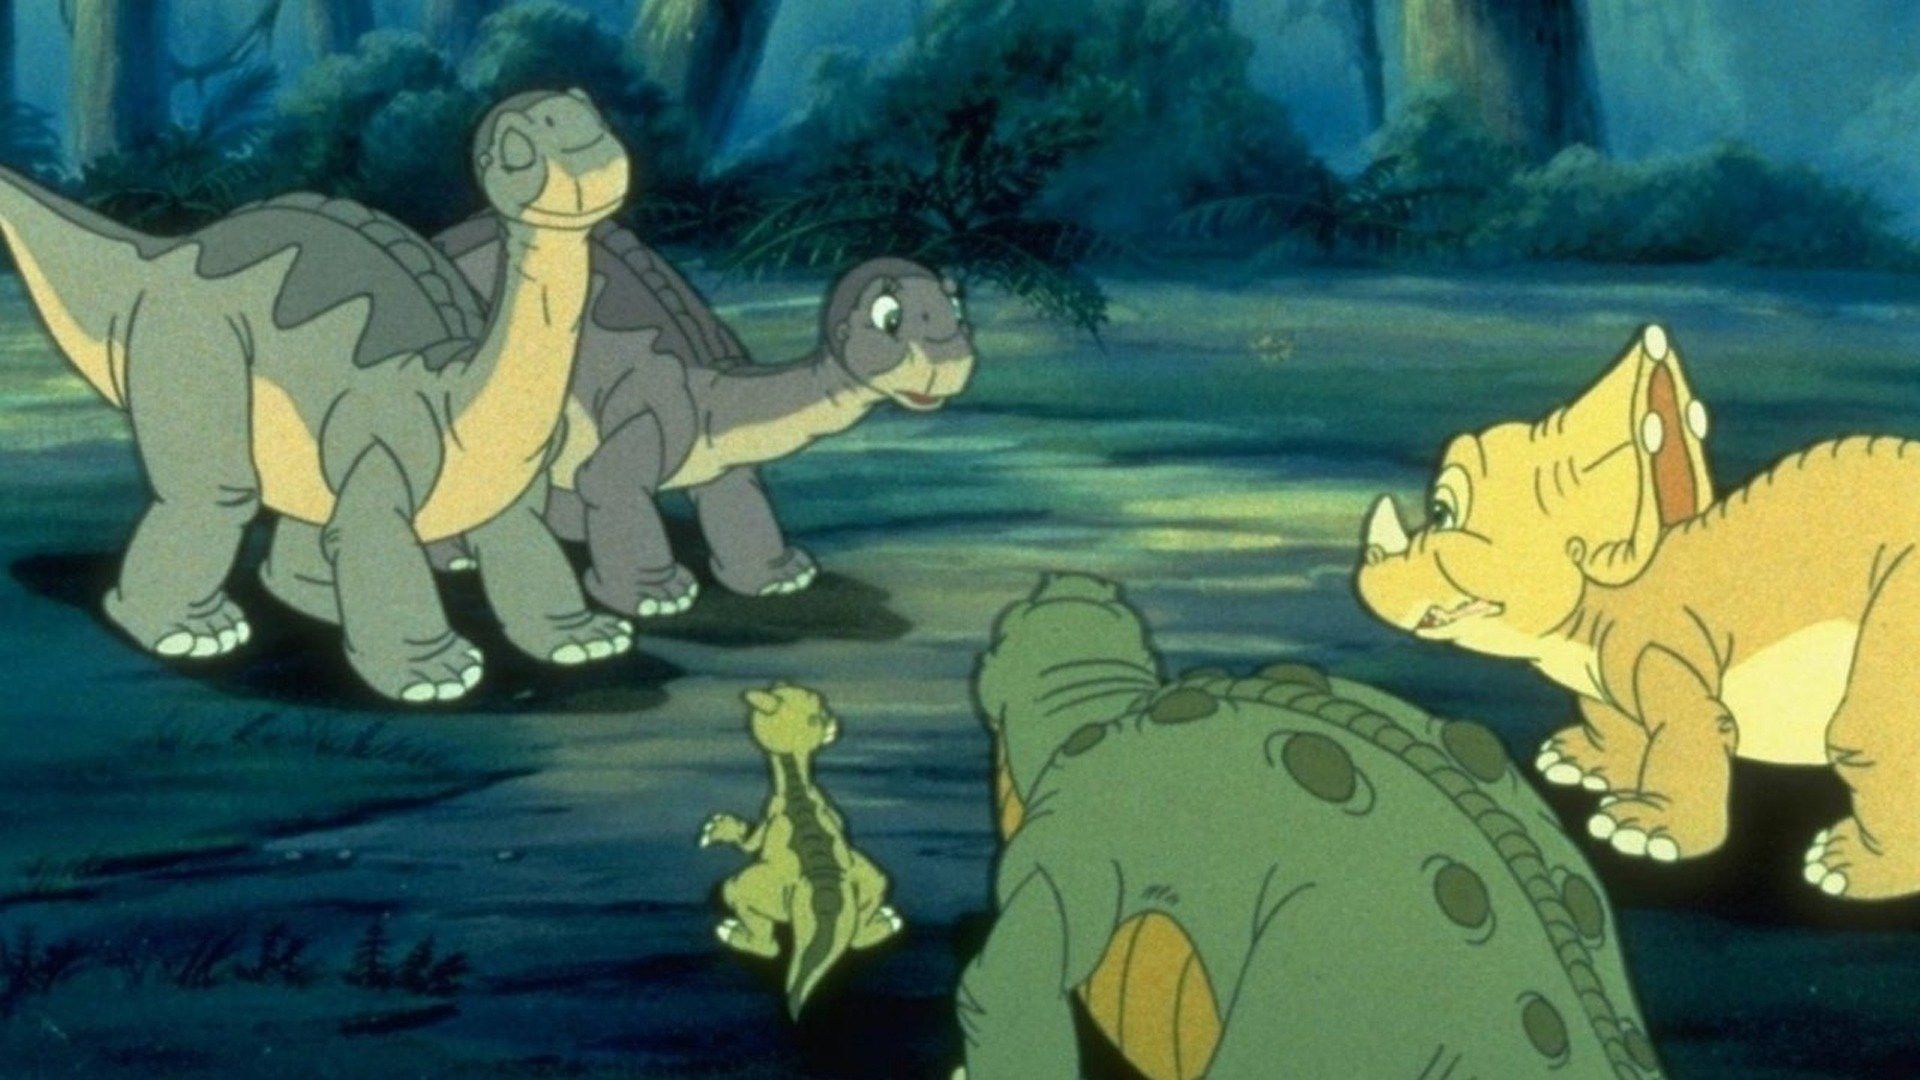 Cue Nostalgia The Top 10 Land Before Time Movies Ranked